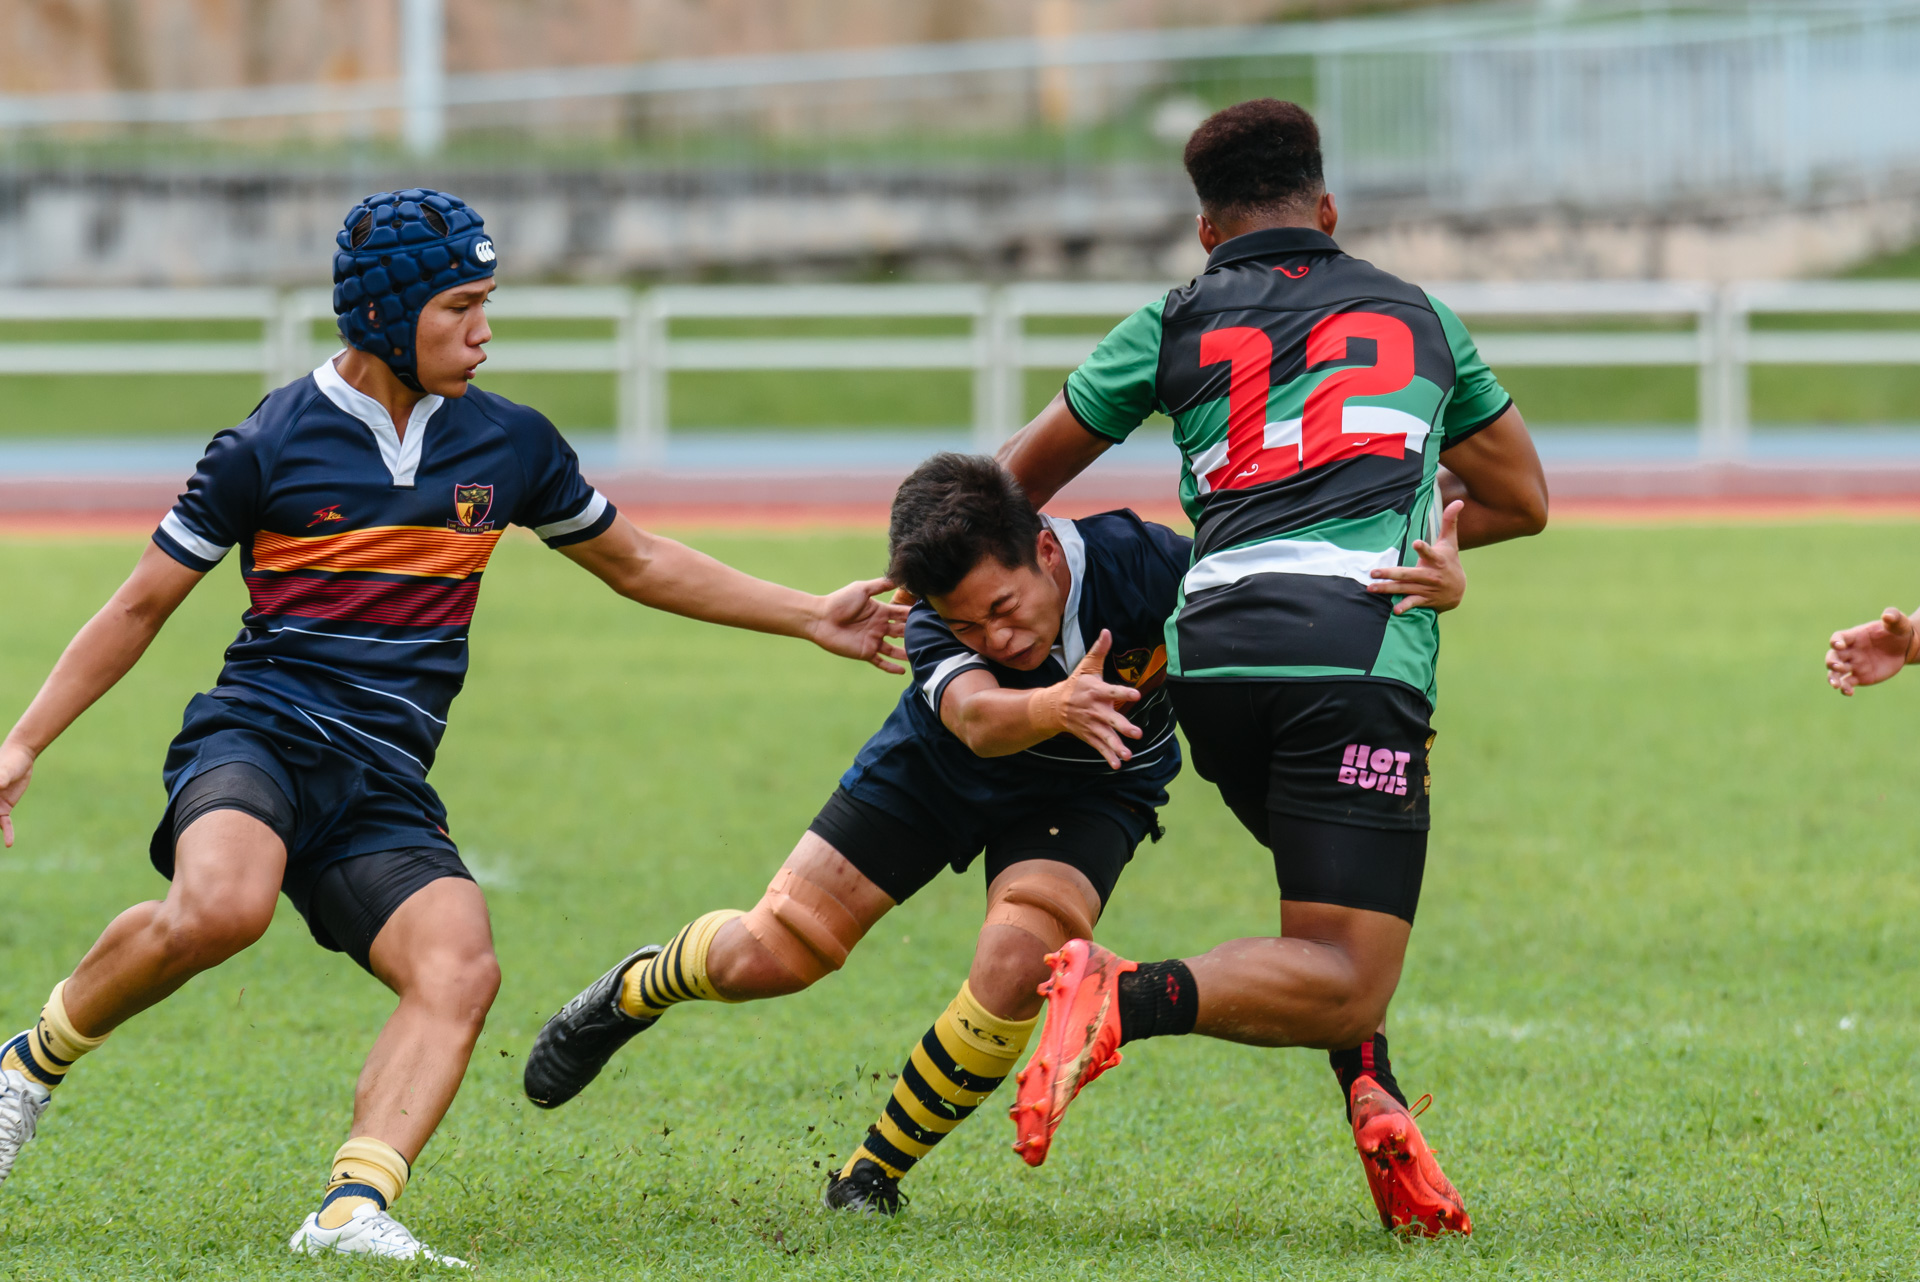 RI’s Olayemi Olaniyan (#12) attempts to fend off the tackle by ACJC’s Ethan Koh (#12). (Photo 4 © Jared Chow/Red Sports)